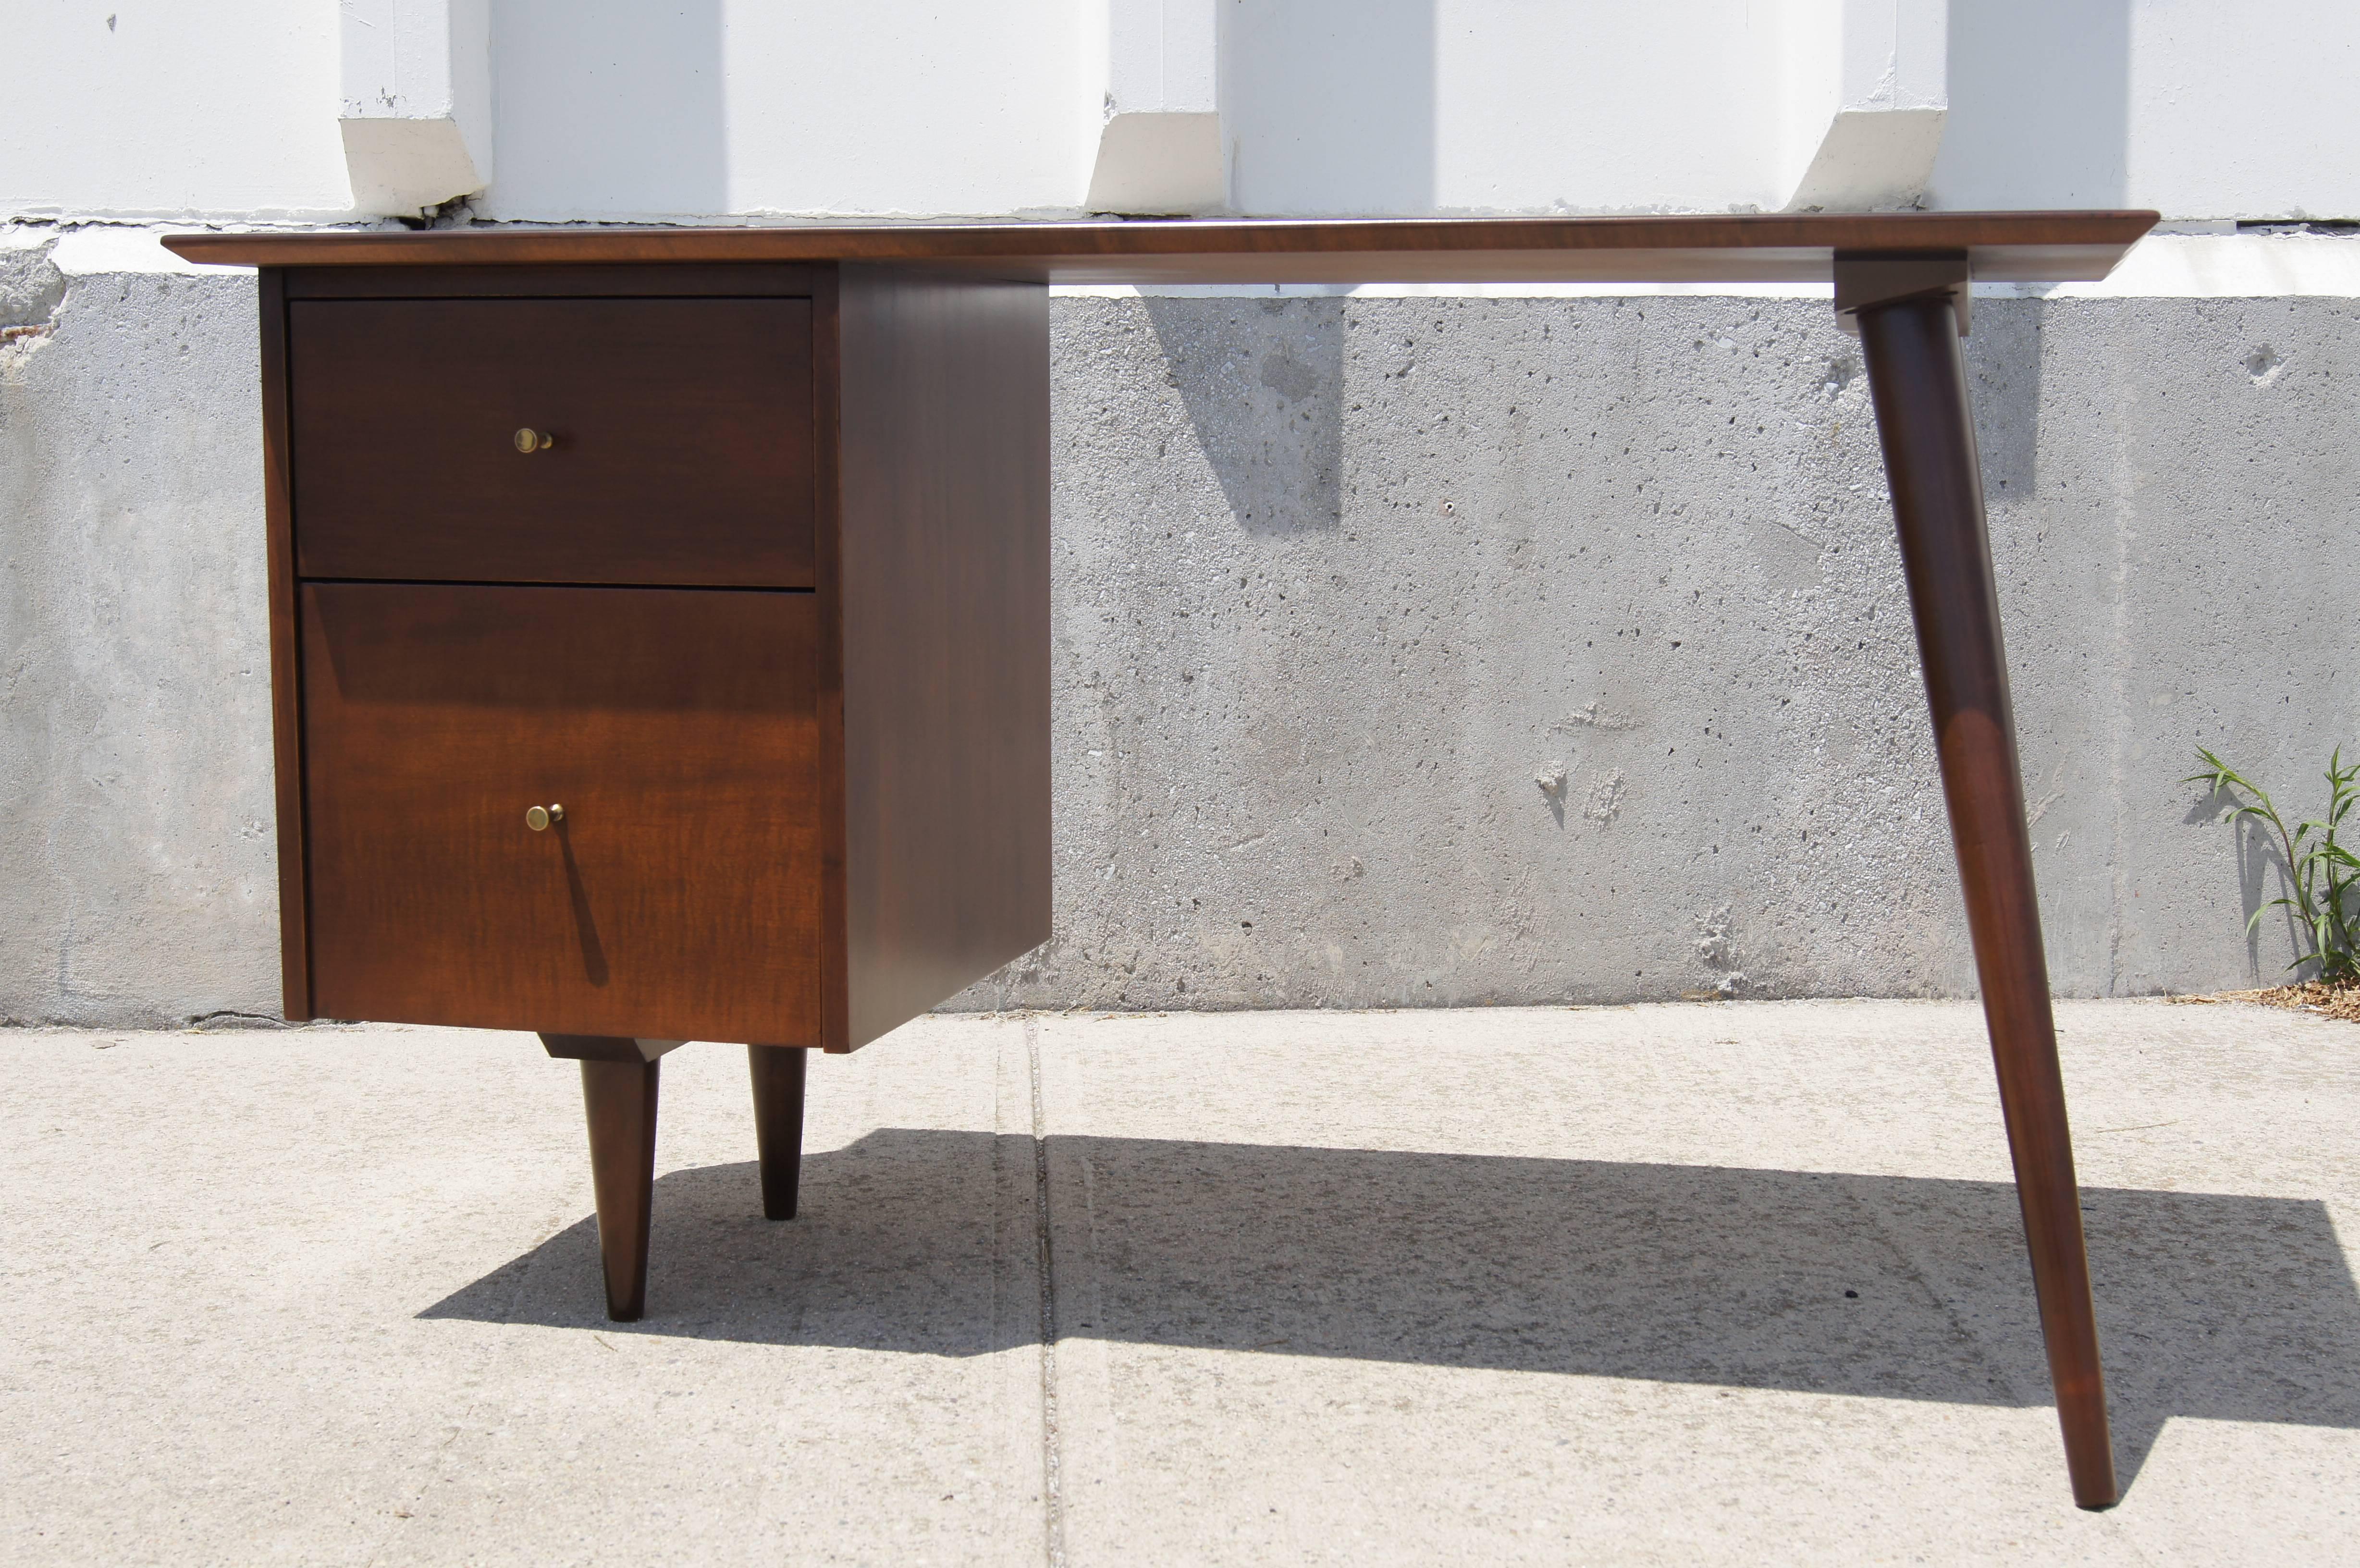 Part of the Planner Group that Paul McCobb designed for Winchendon in the 1950s, this classic desk places a rectangular top over a bank of two drawers on the left and two tapered dowel legs canted to the right. The solid maple desk is finished with